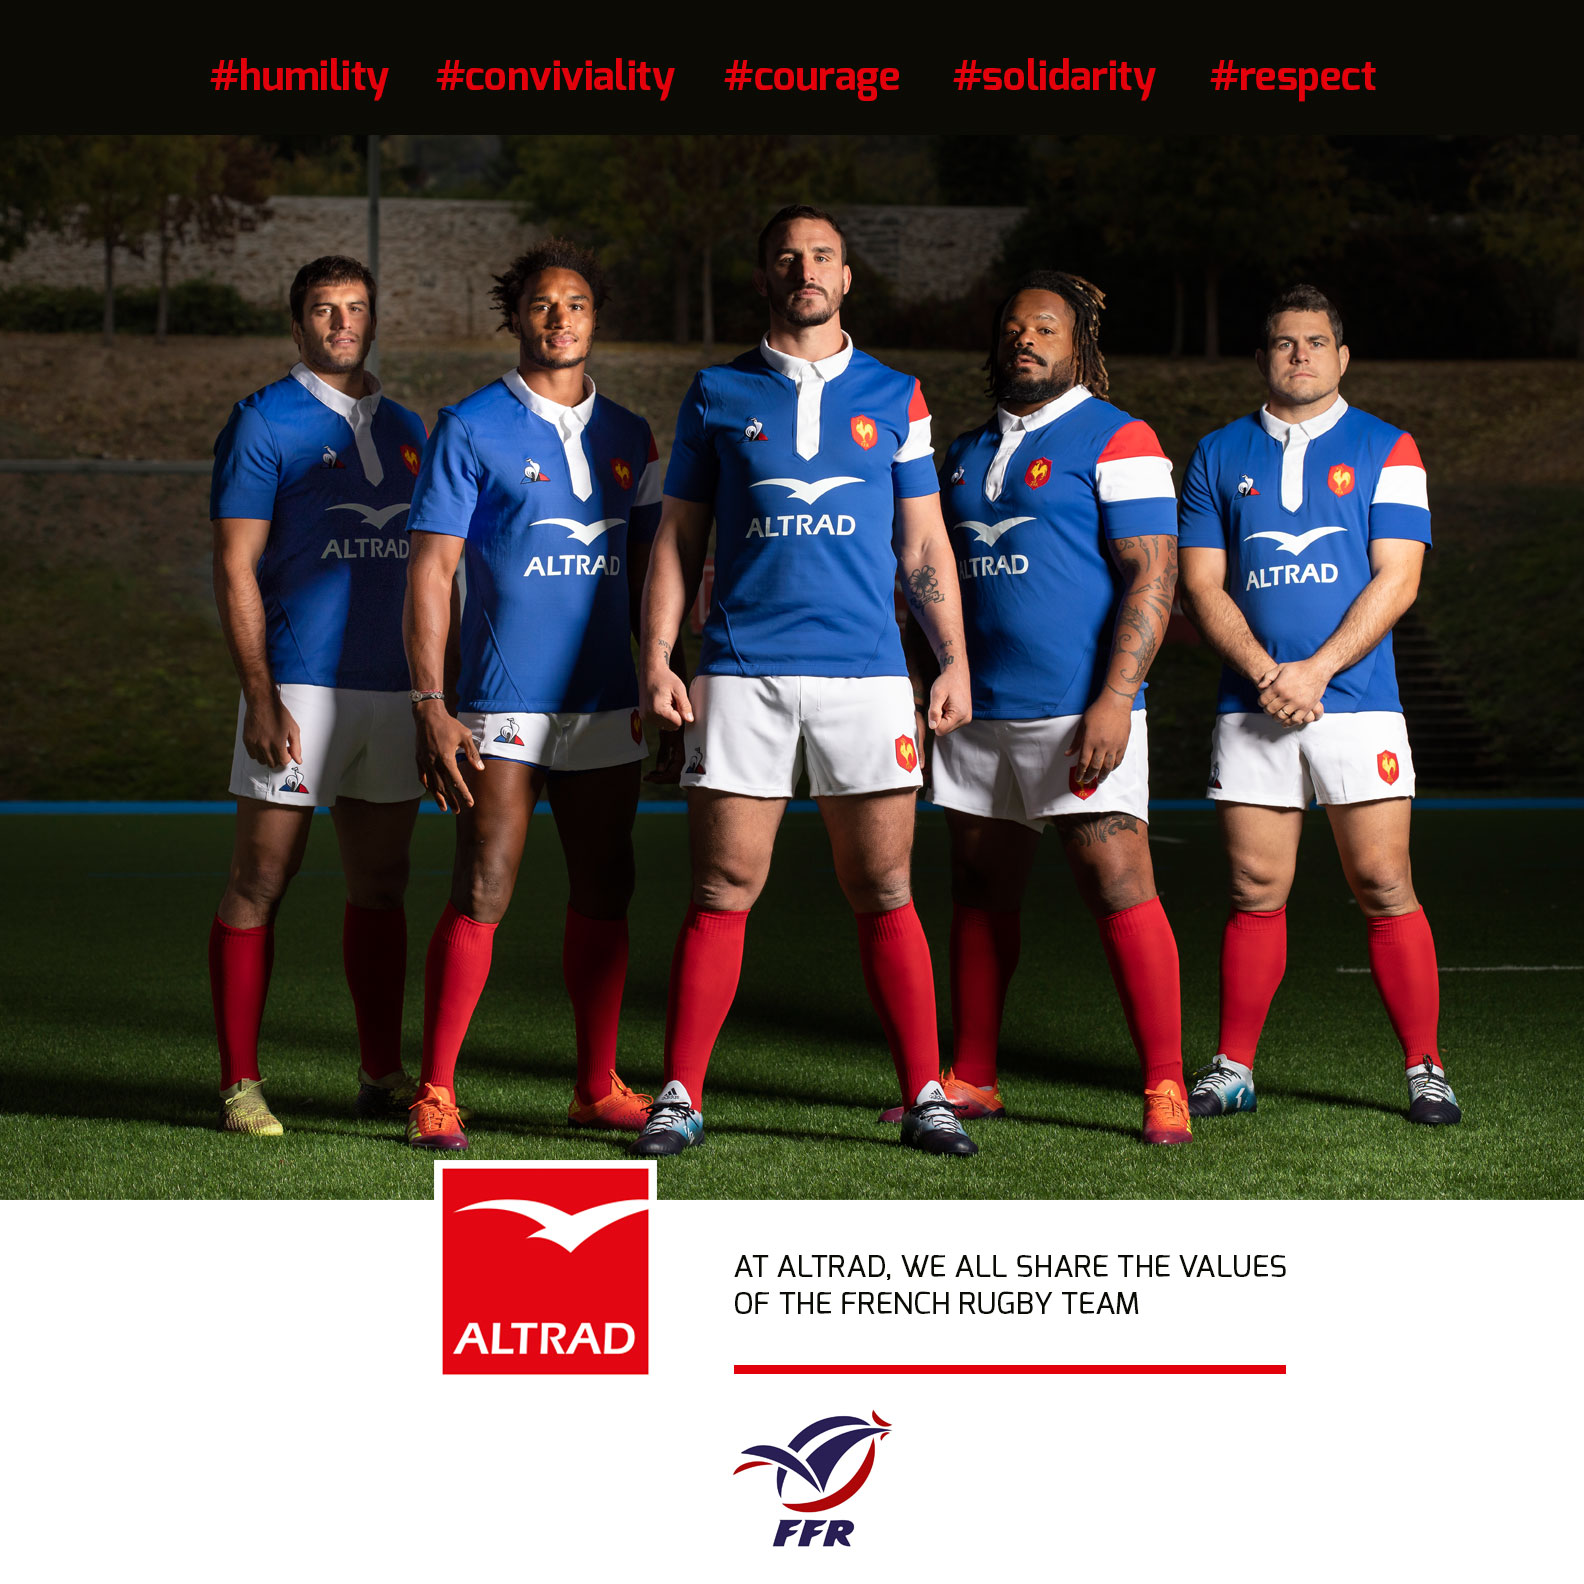 The XV de France begins its first test match of the autumn tour against the Springboks